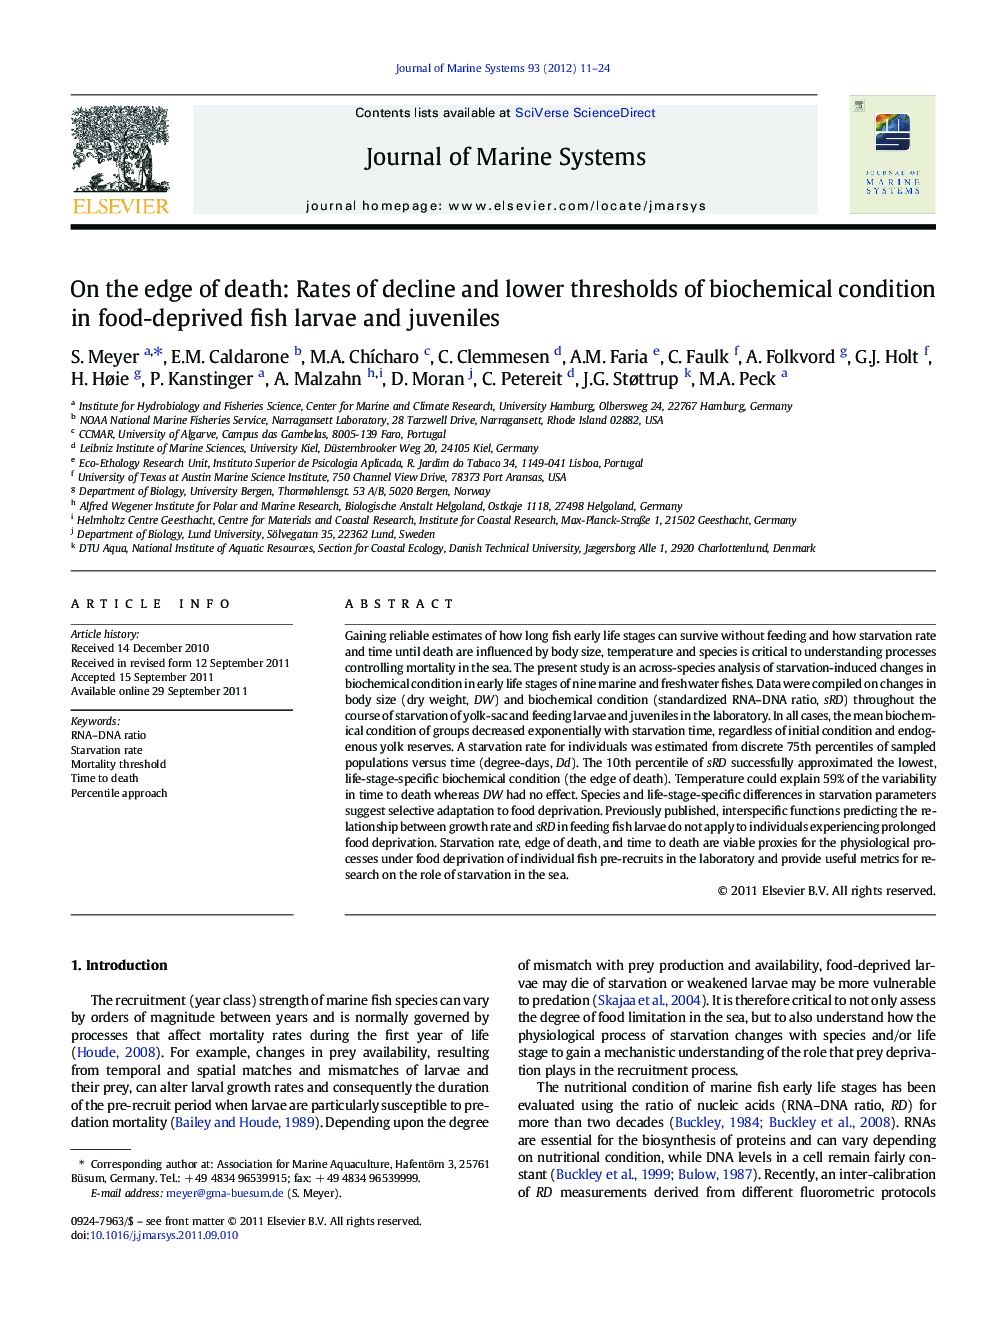 On the edge of death: Rates of decline and lower thresholds of biochemical condition in food-deprived fish larvae and juveniles